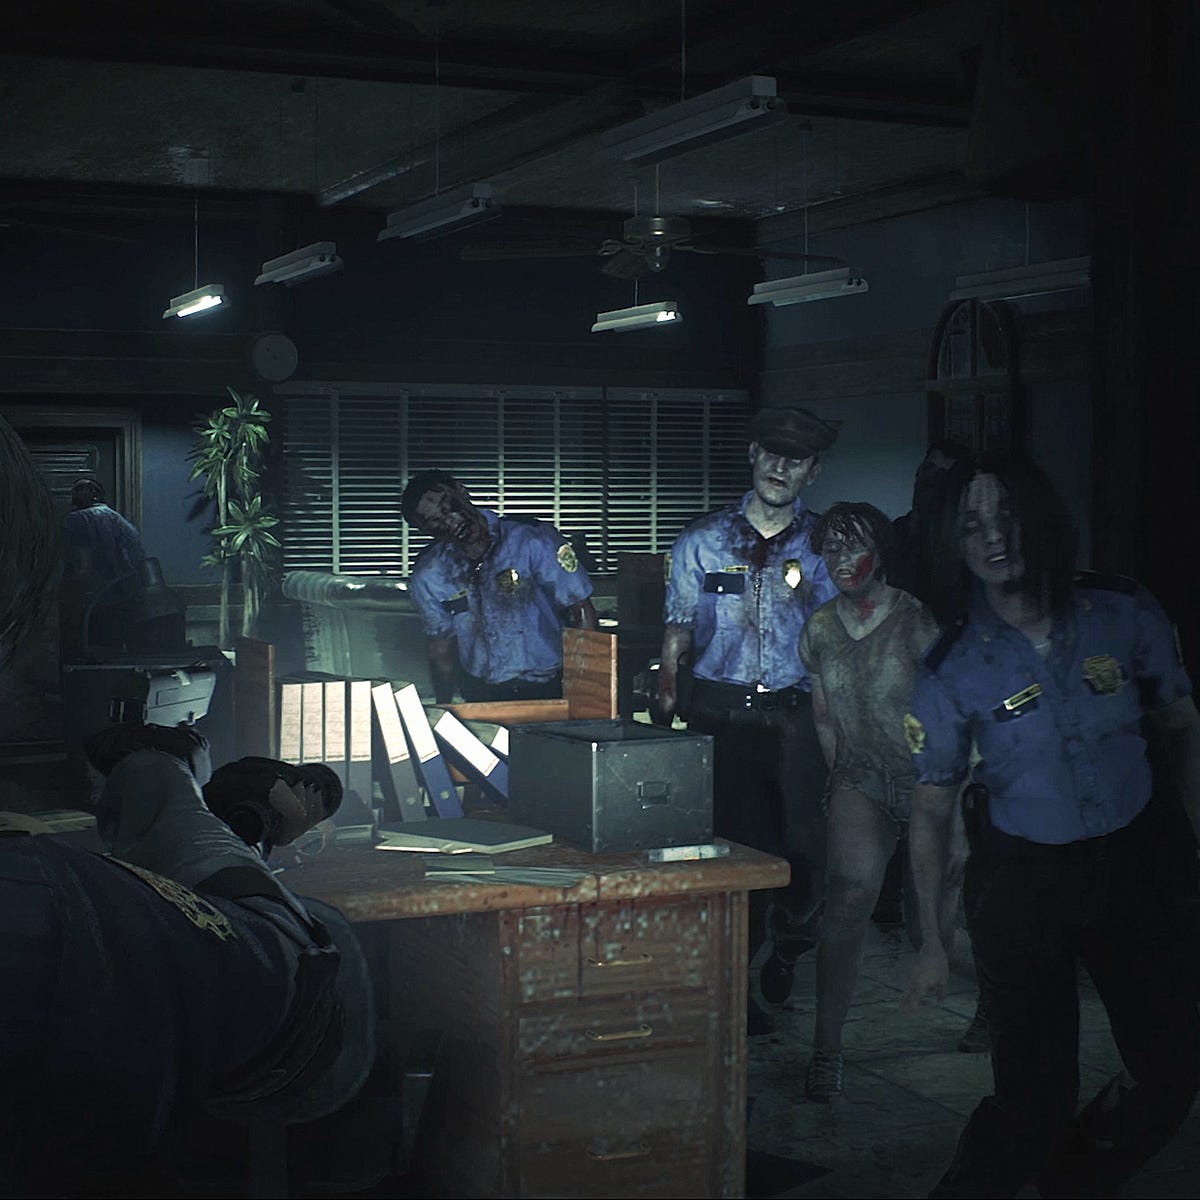 Resident Evil 2 remake's Tyrant is wonderfully terrifying - and he can do  one